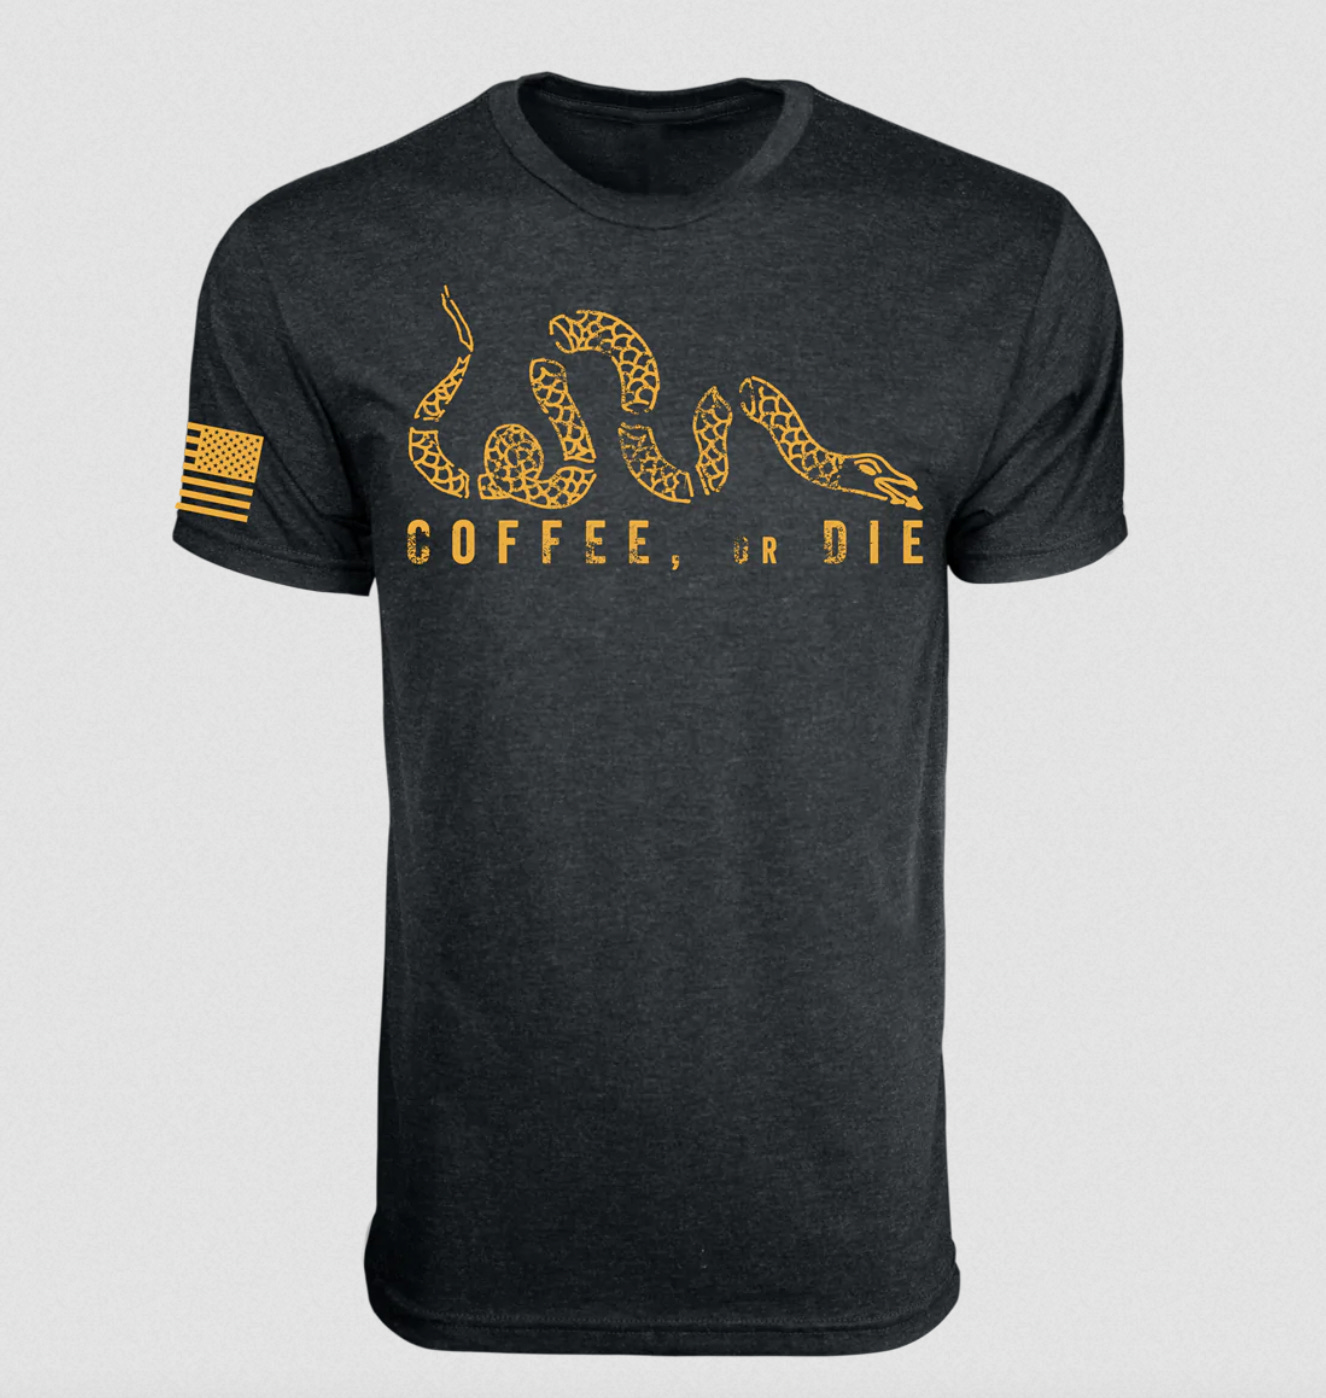 An image of a black t-shirt with gold lettering that says coffee or die. There is an historic snake graphic on the tee.